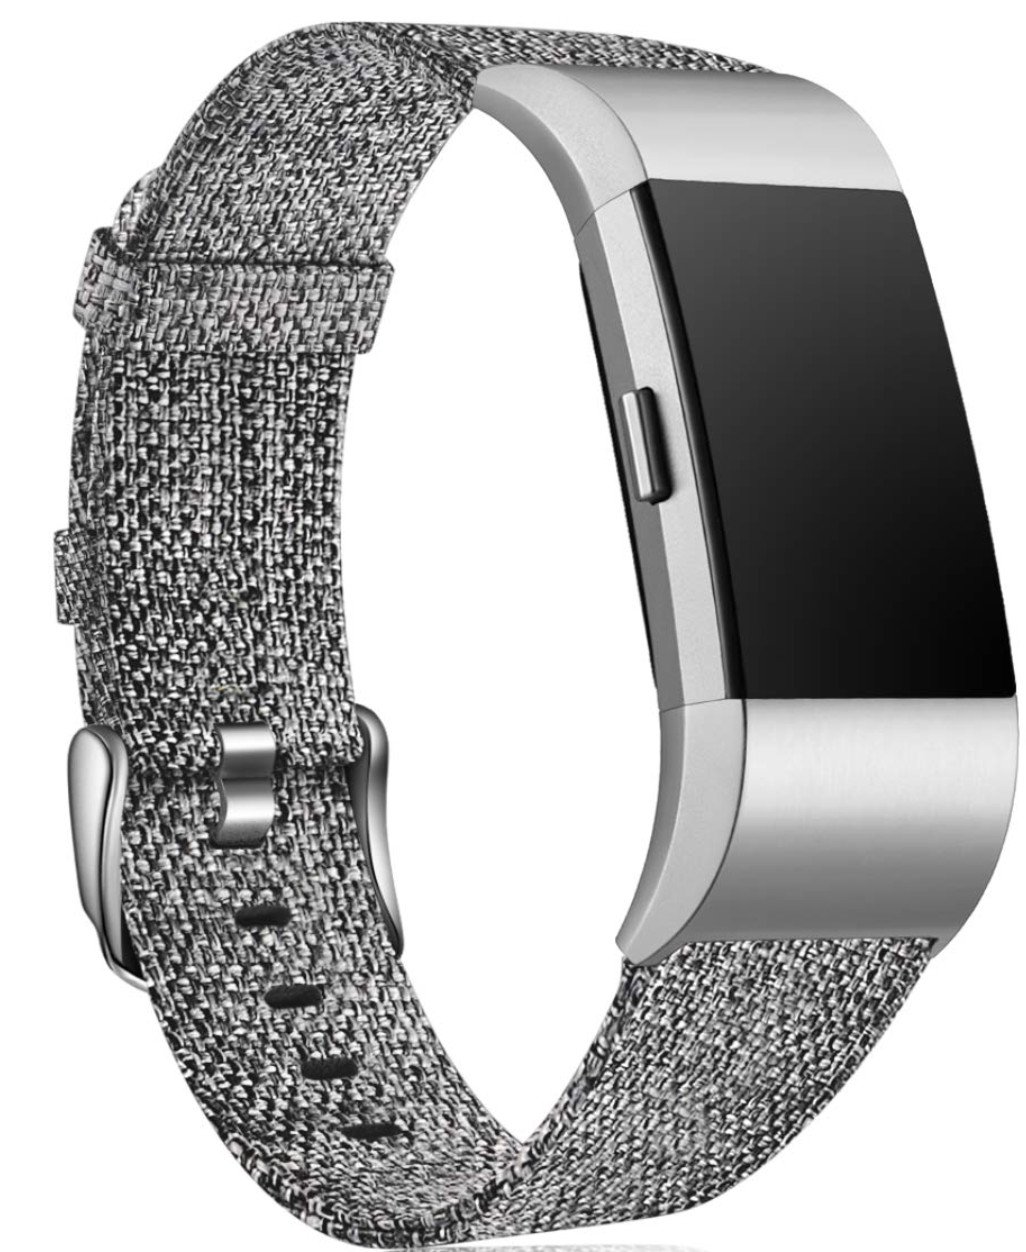 replacement bands for fitbit charge 2